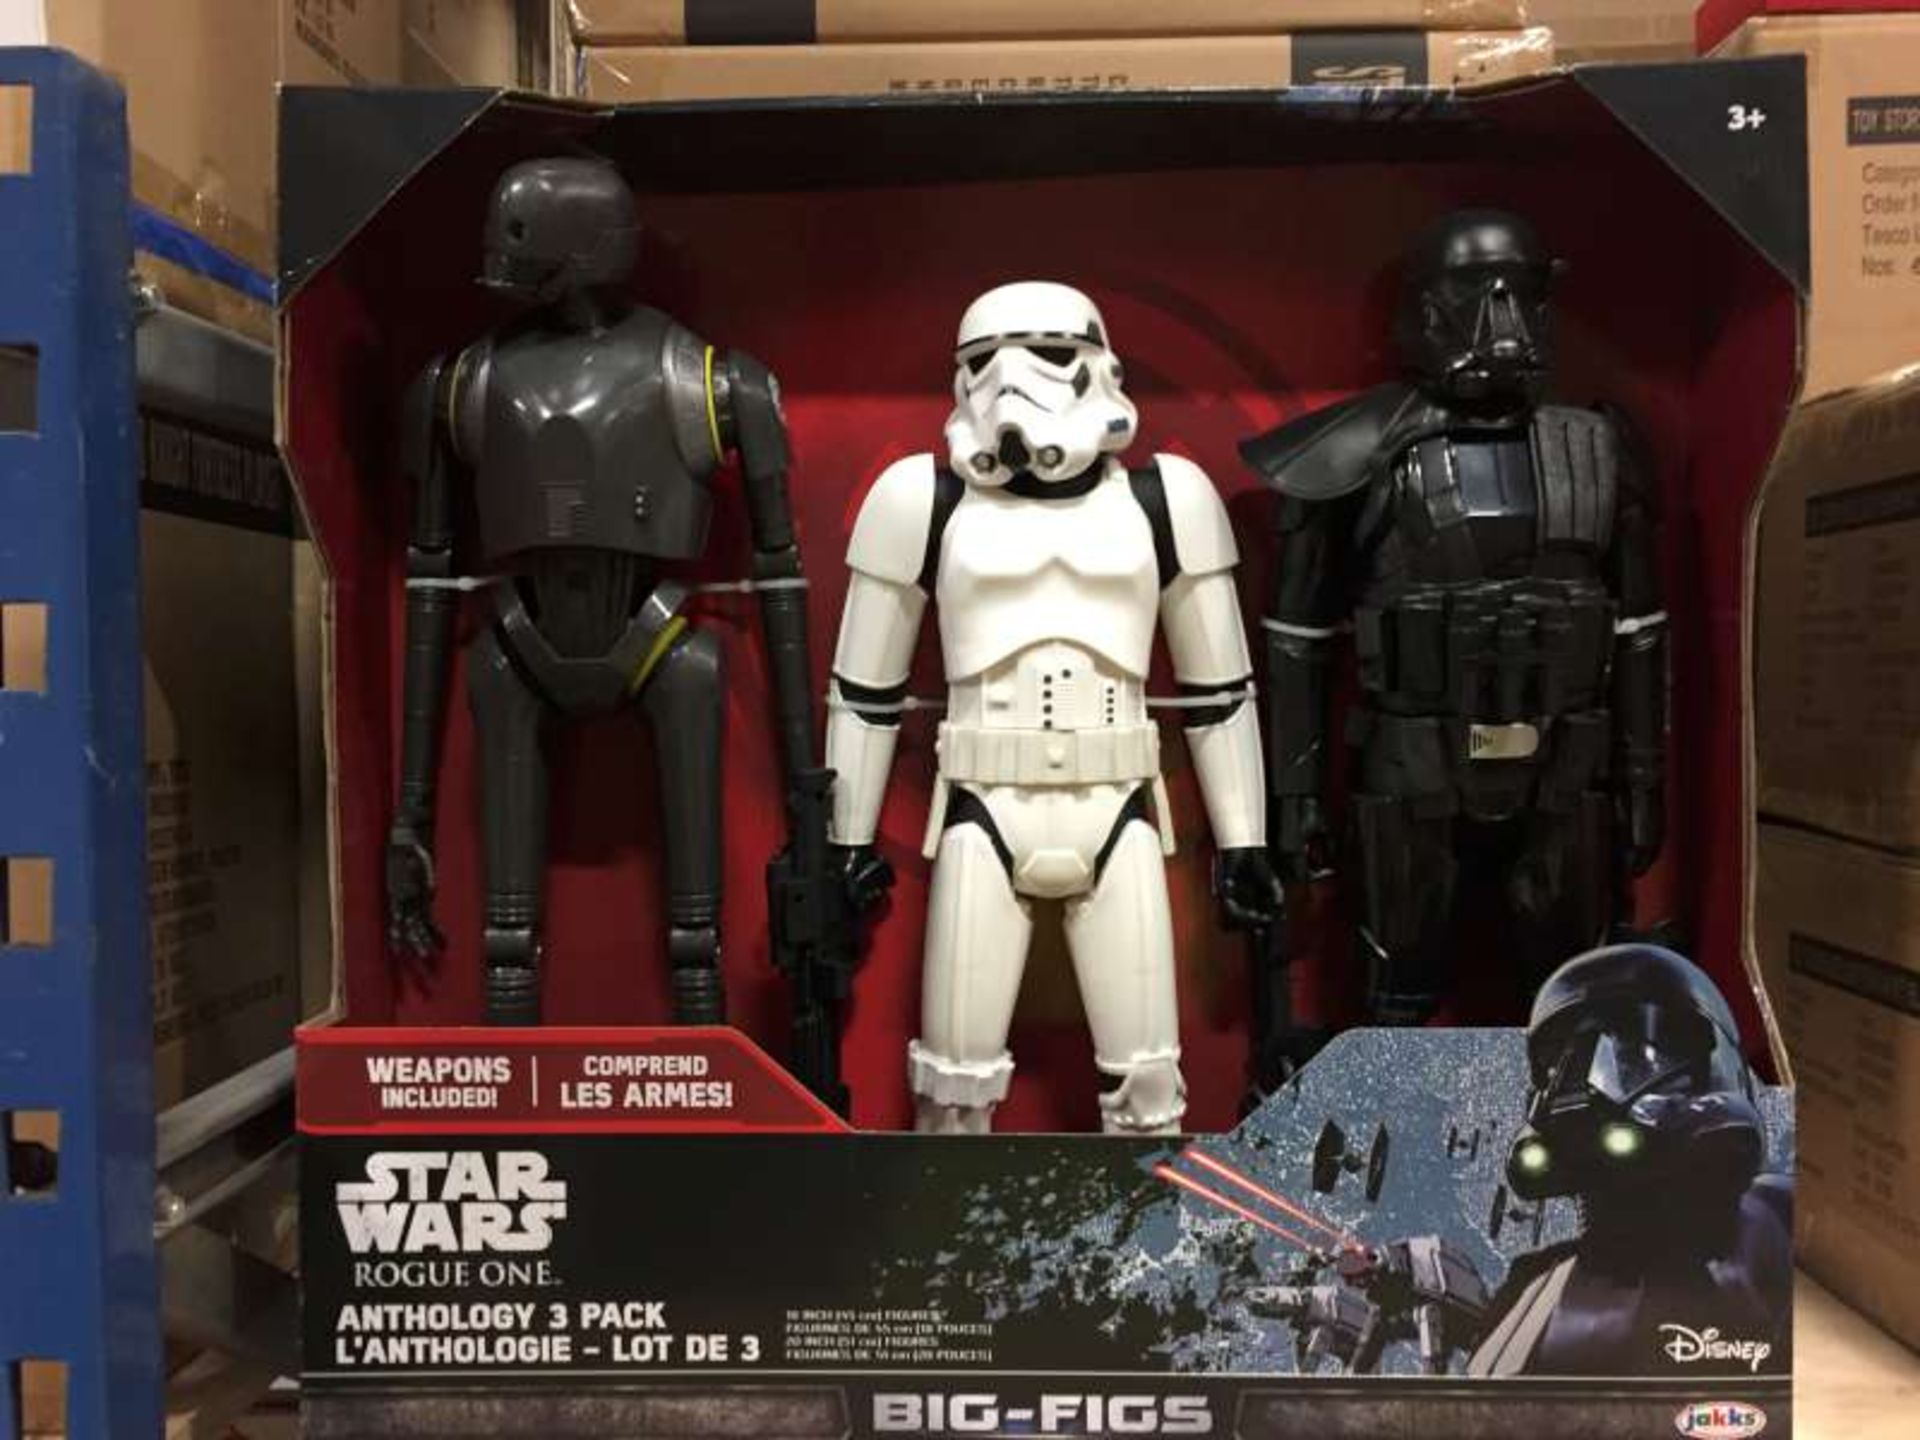 8 X BRAND NEW BOXED STAR WARS ROGUE ONE ANTHOLOGY 3 PACK 18 INCH FIGURE SETS IN 4 BOXES